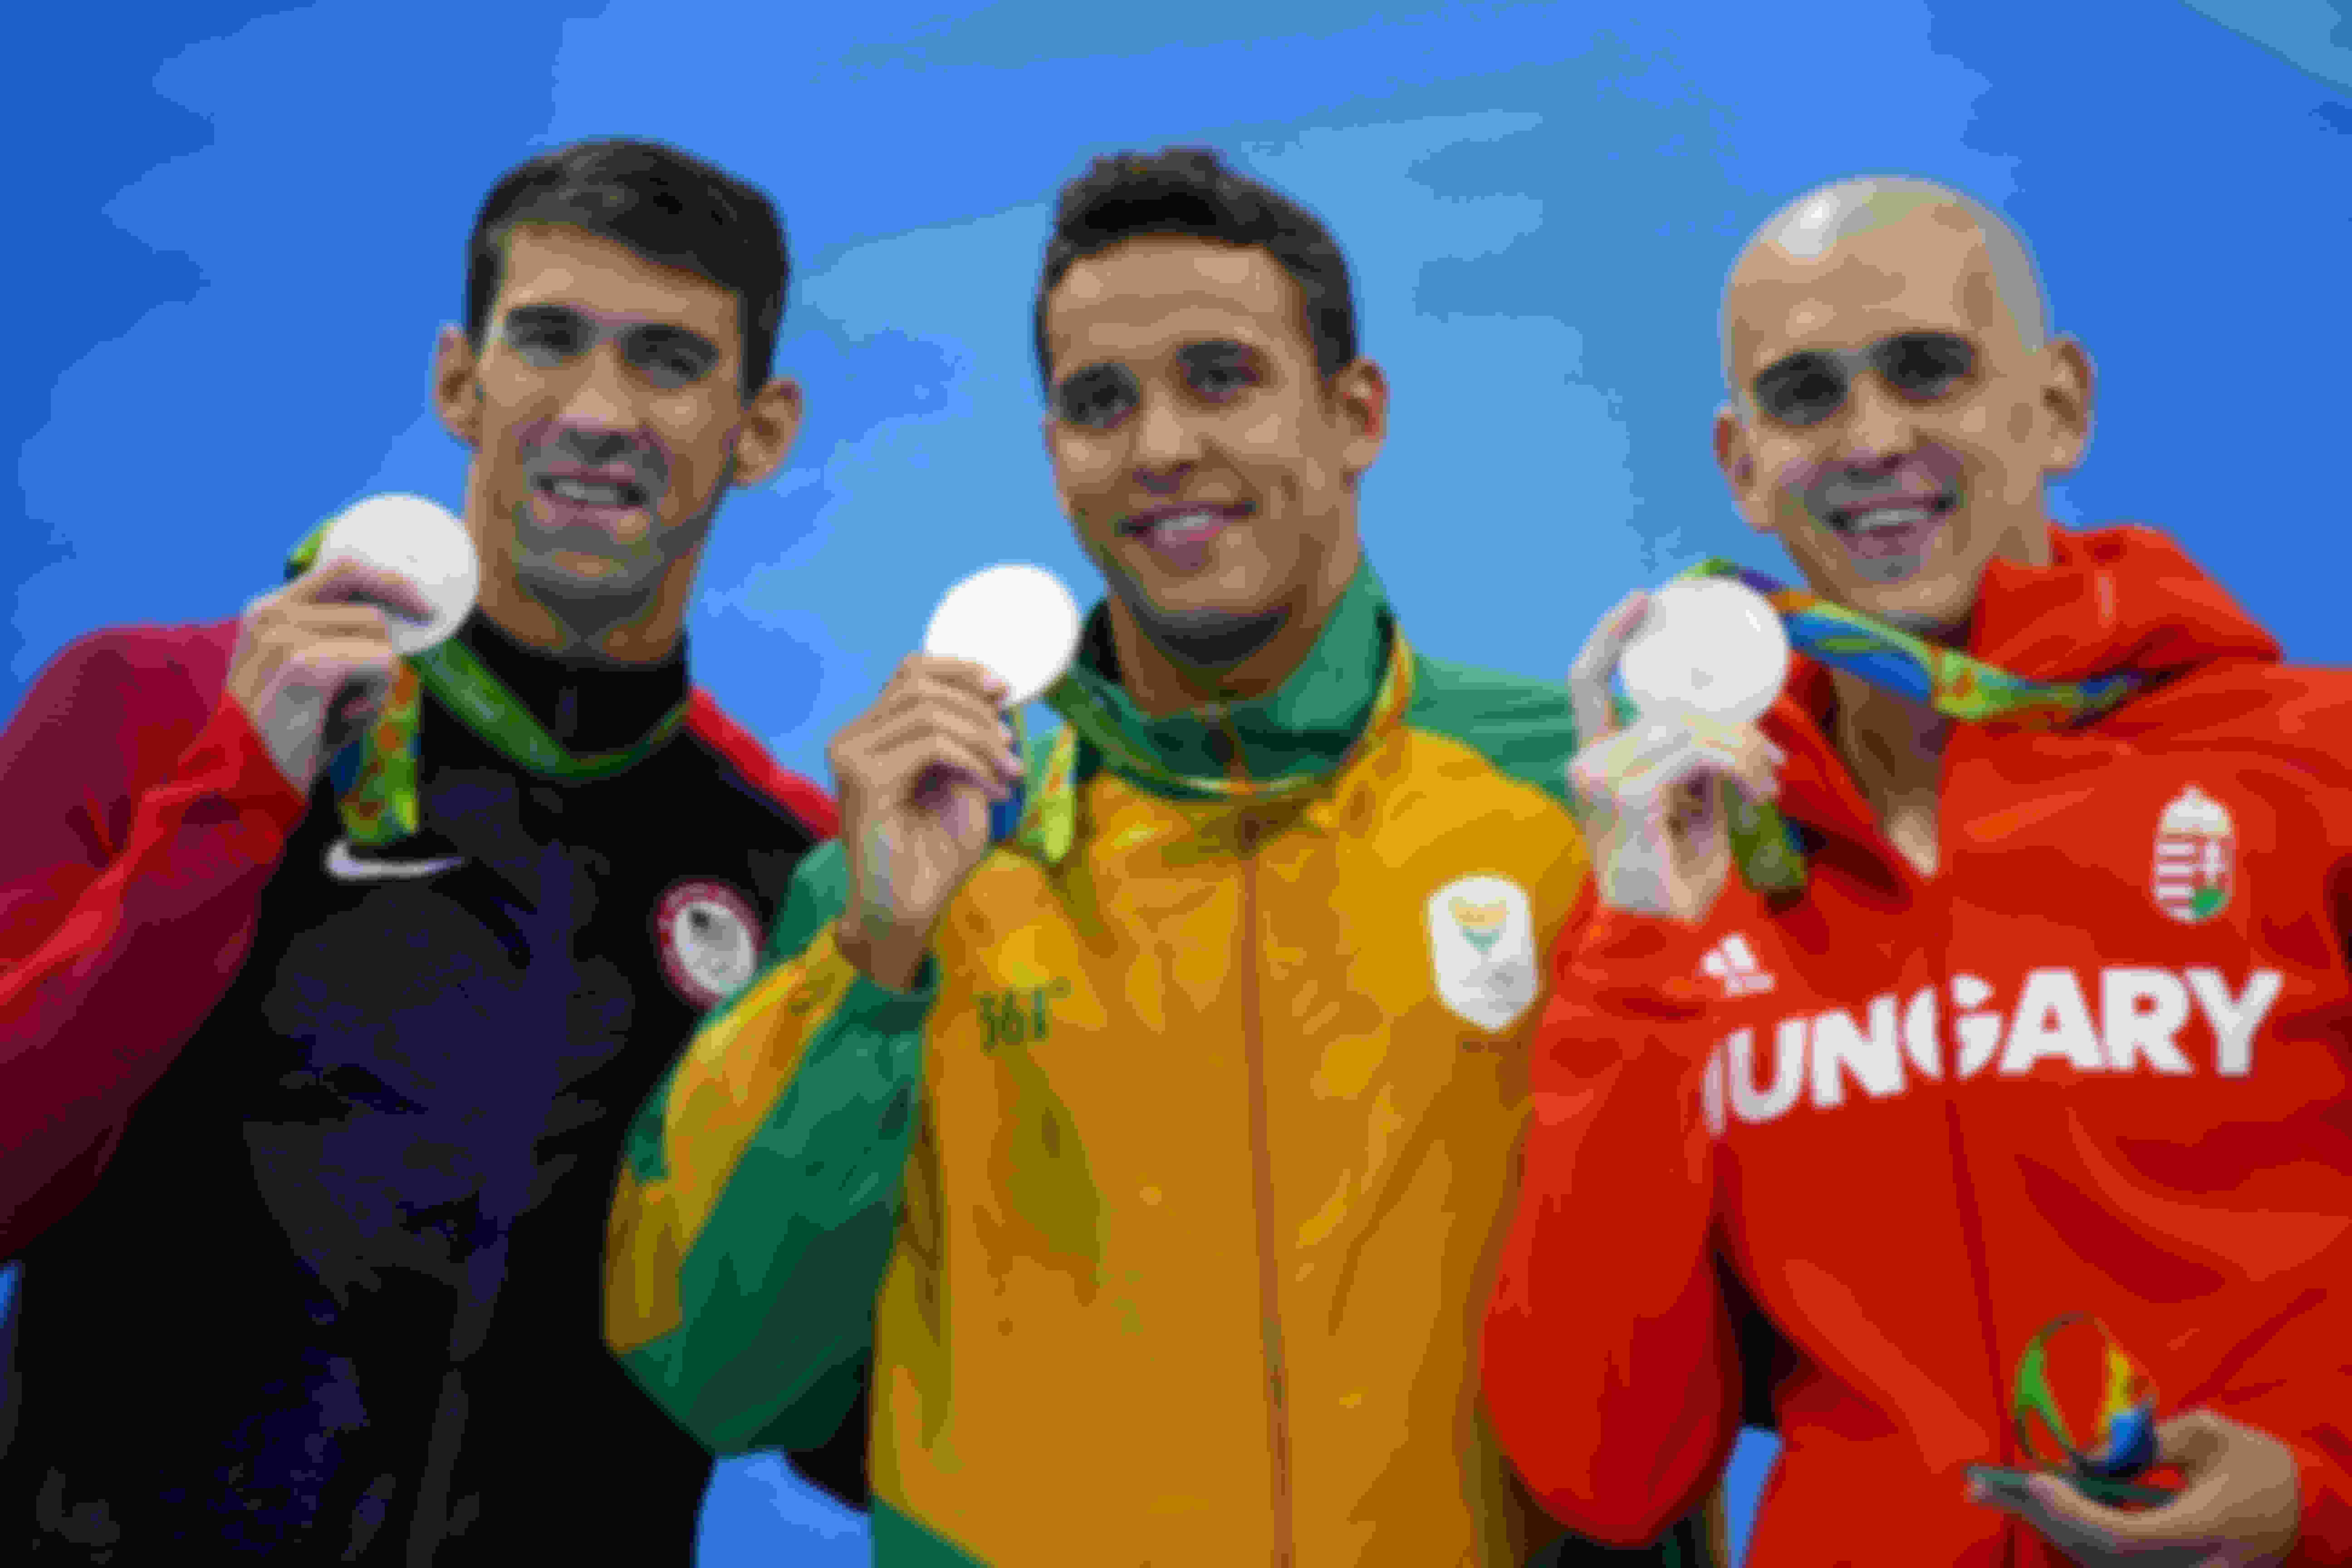 Michael Phelps (L), Chad le Clos (C) and Laszlo Cseh (R) celebrate winning joint silver in the 100m Butterfly at the Rio 2016 Olympic Games.